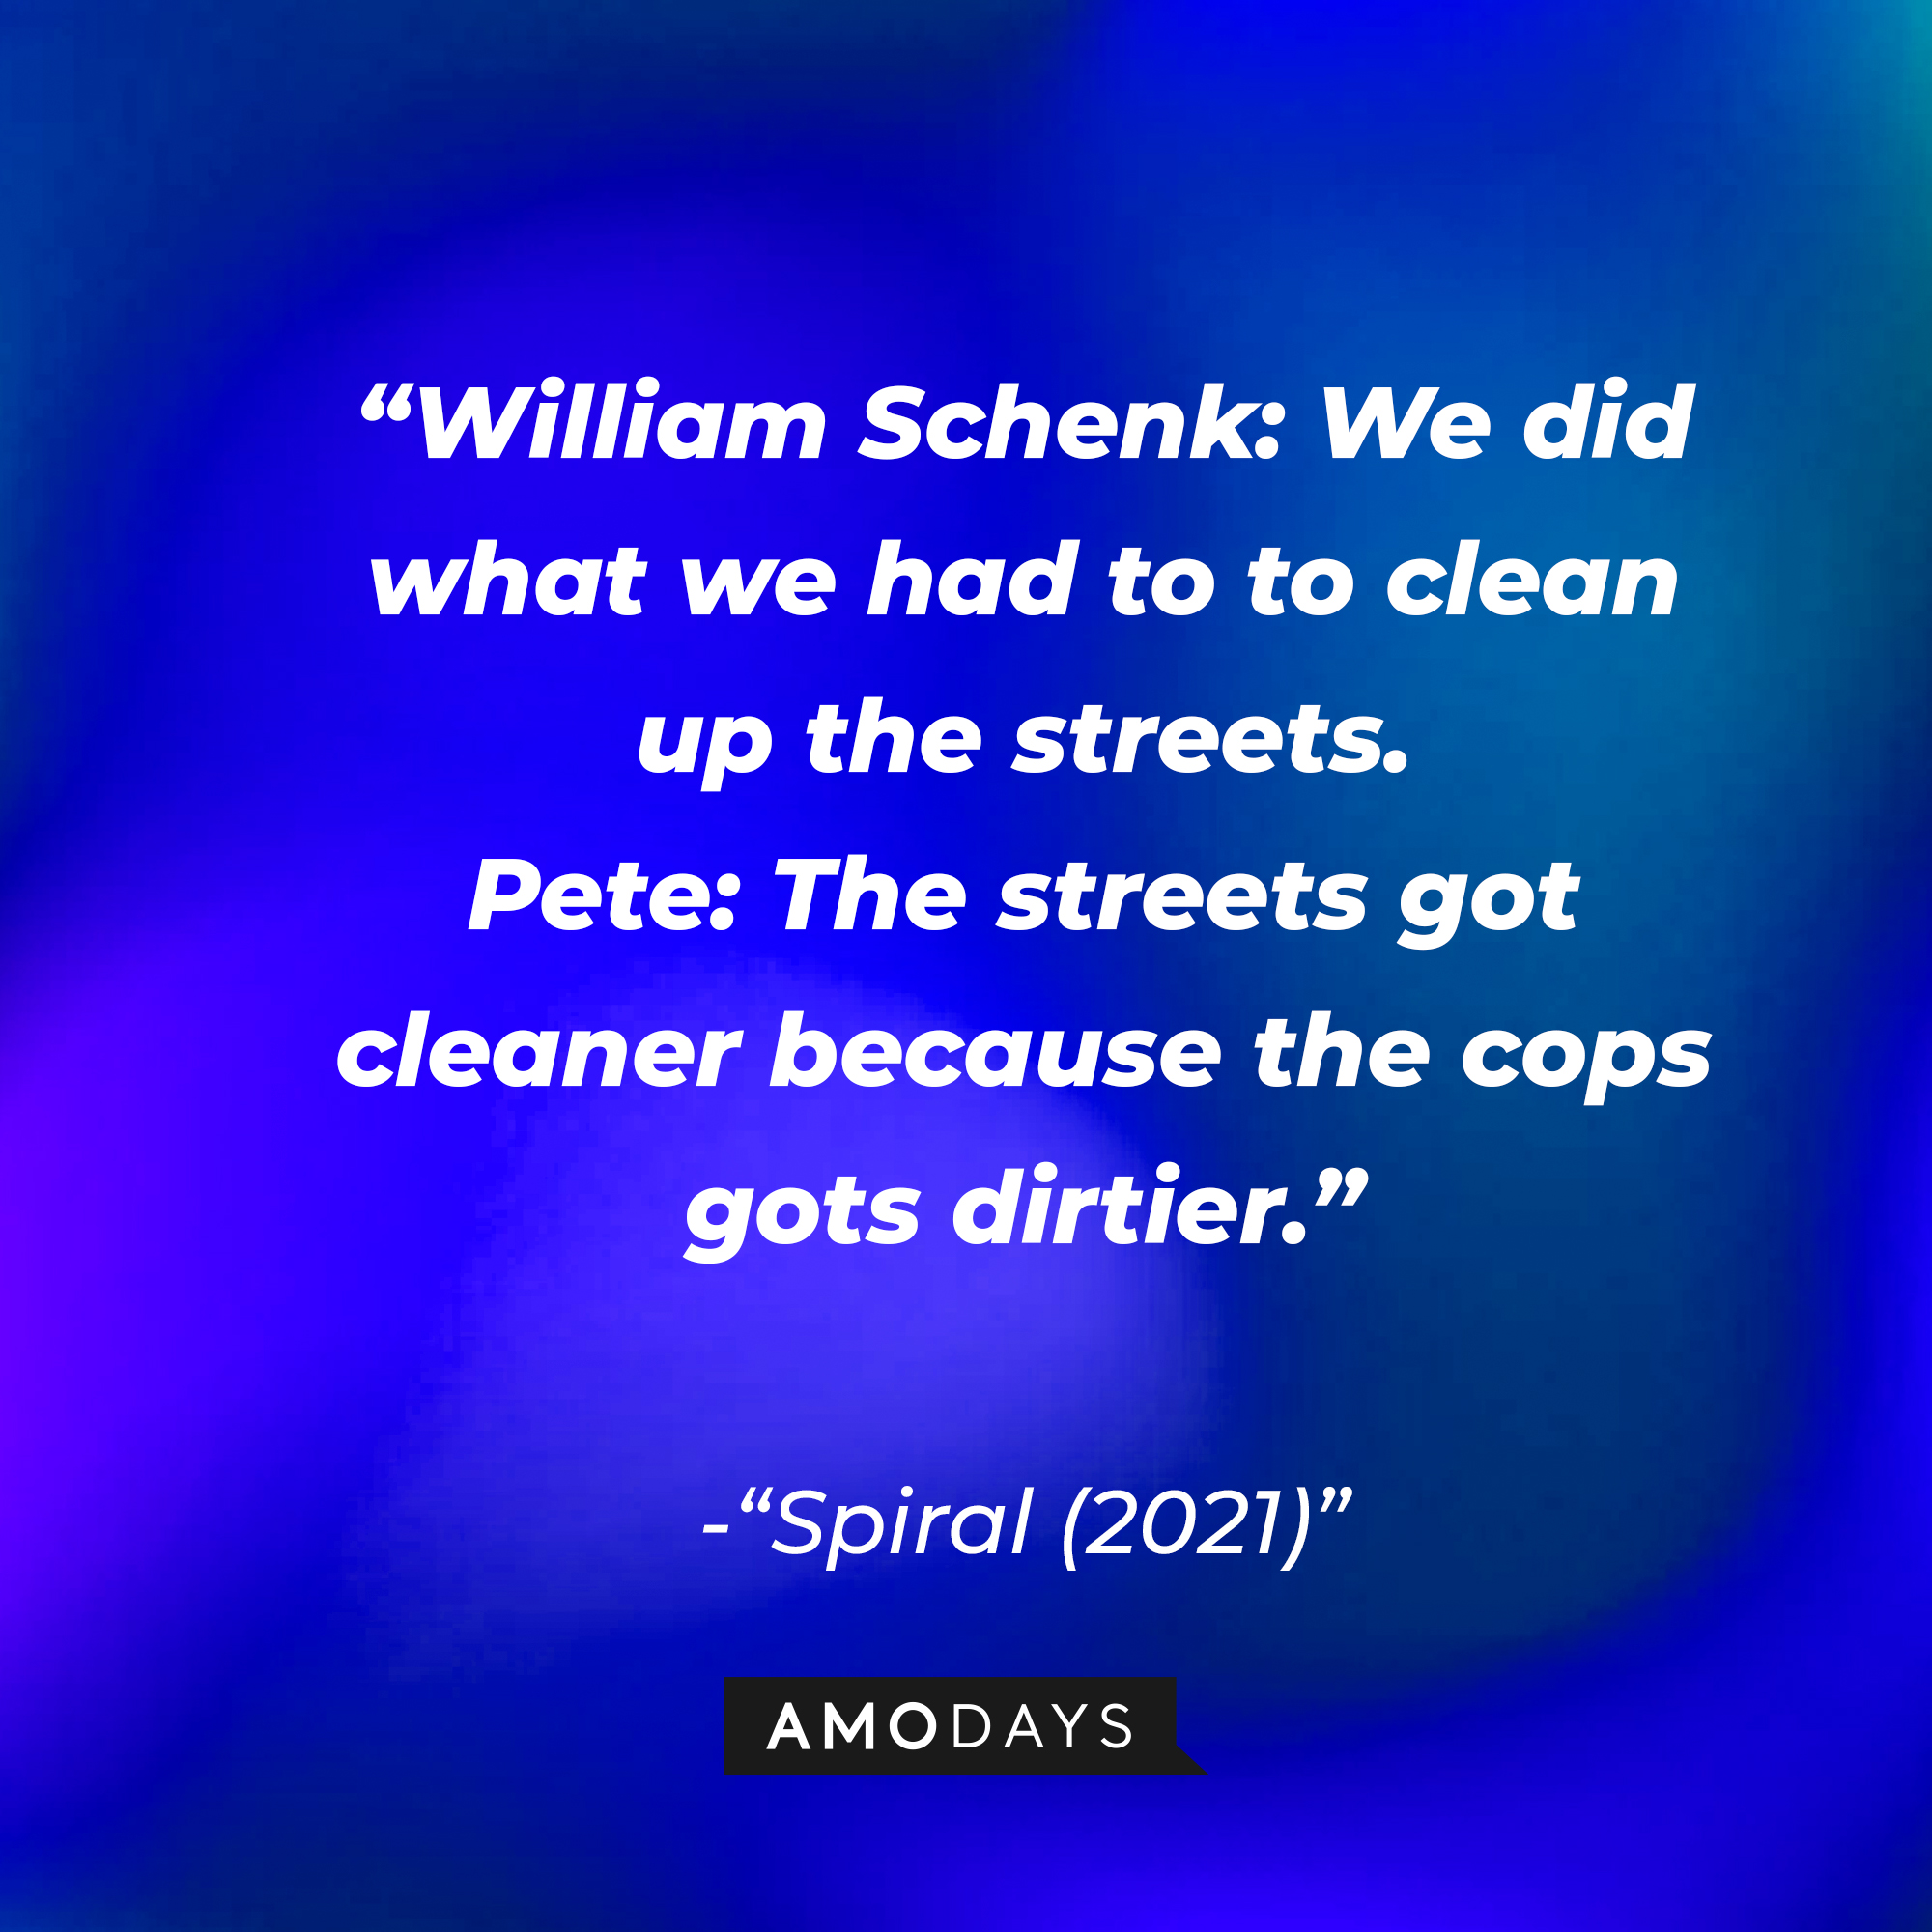 "Spiral (2021)" dialogue: “William Schenk: We did what we had to to clean up the streets. Pete: The streets got cleaner because the cops gots dirtier.” | Source: Amodays